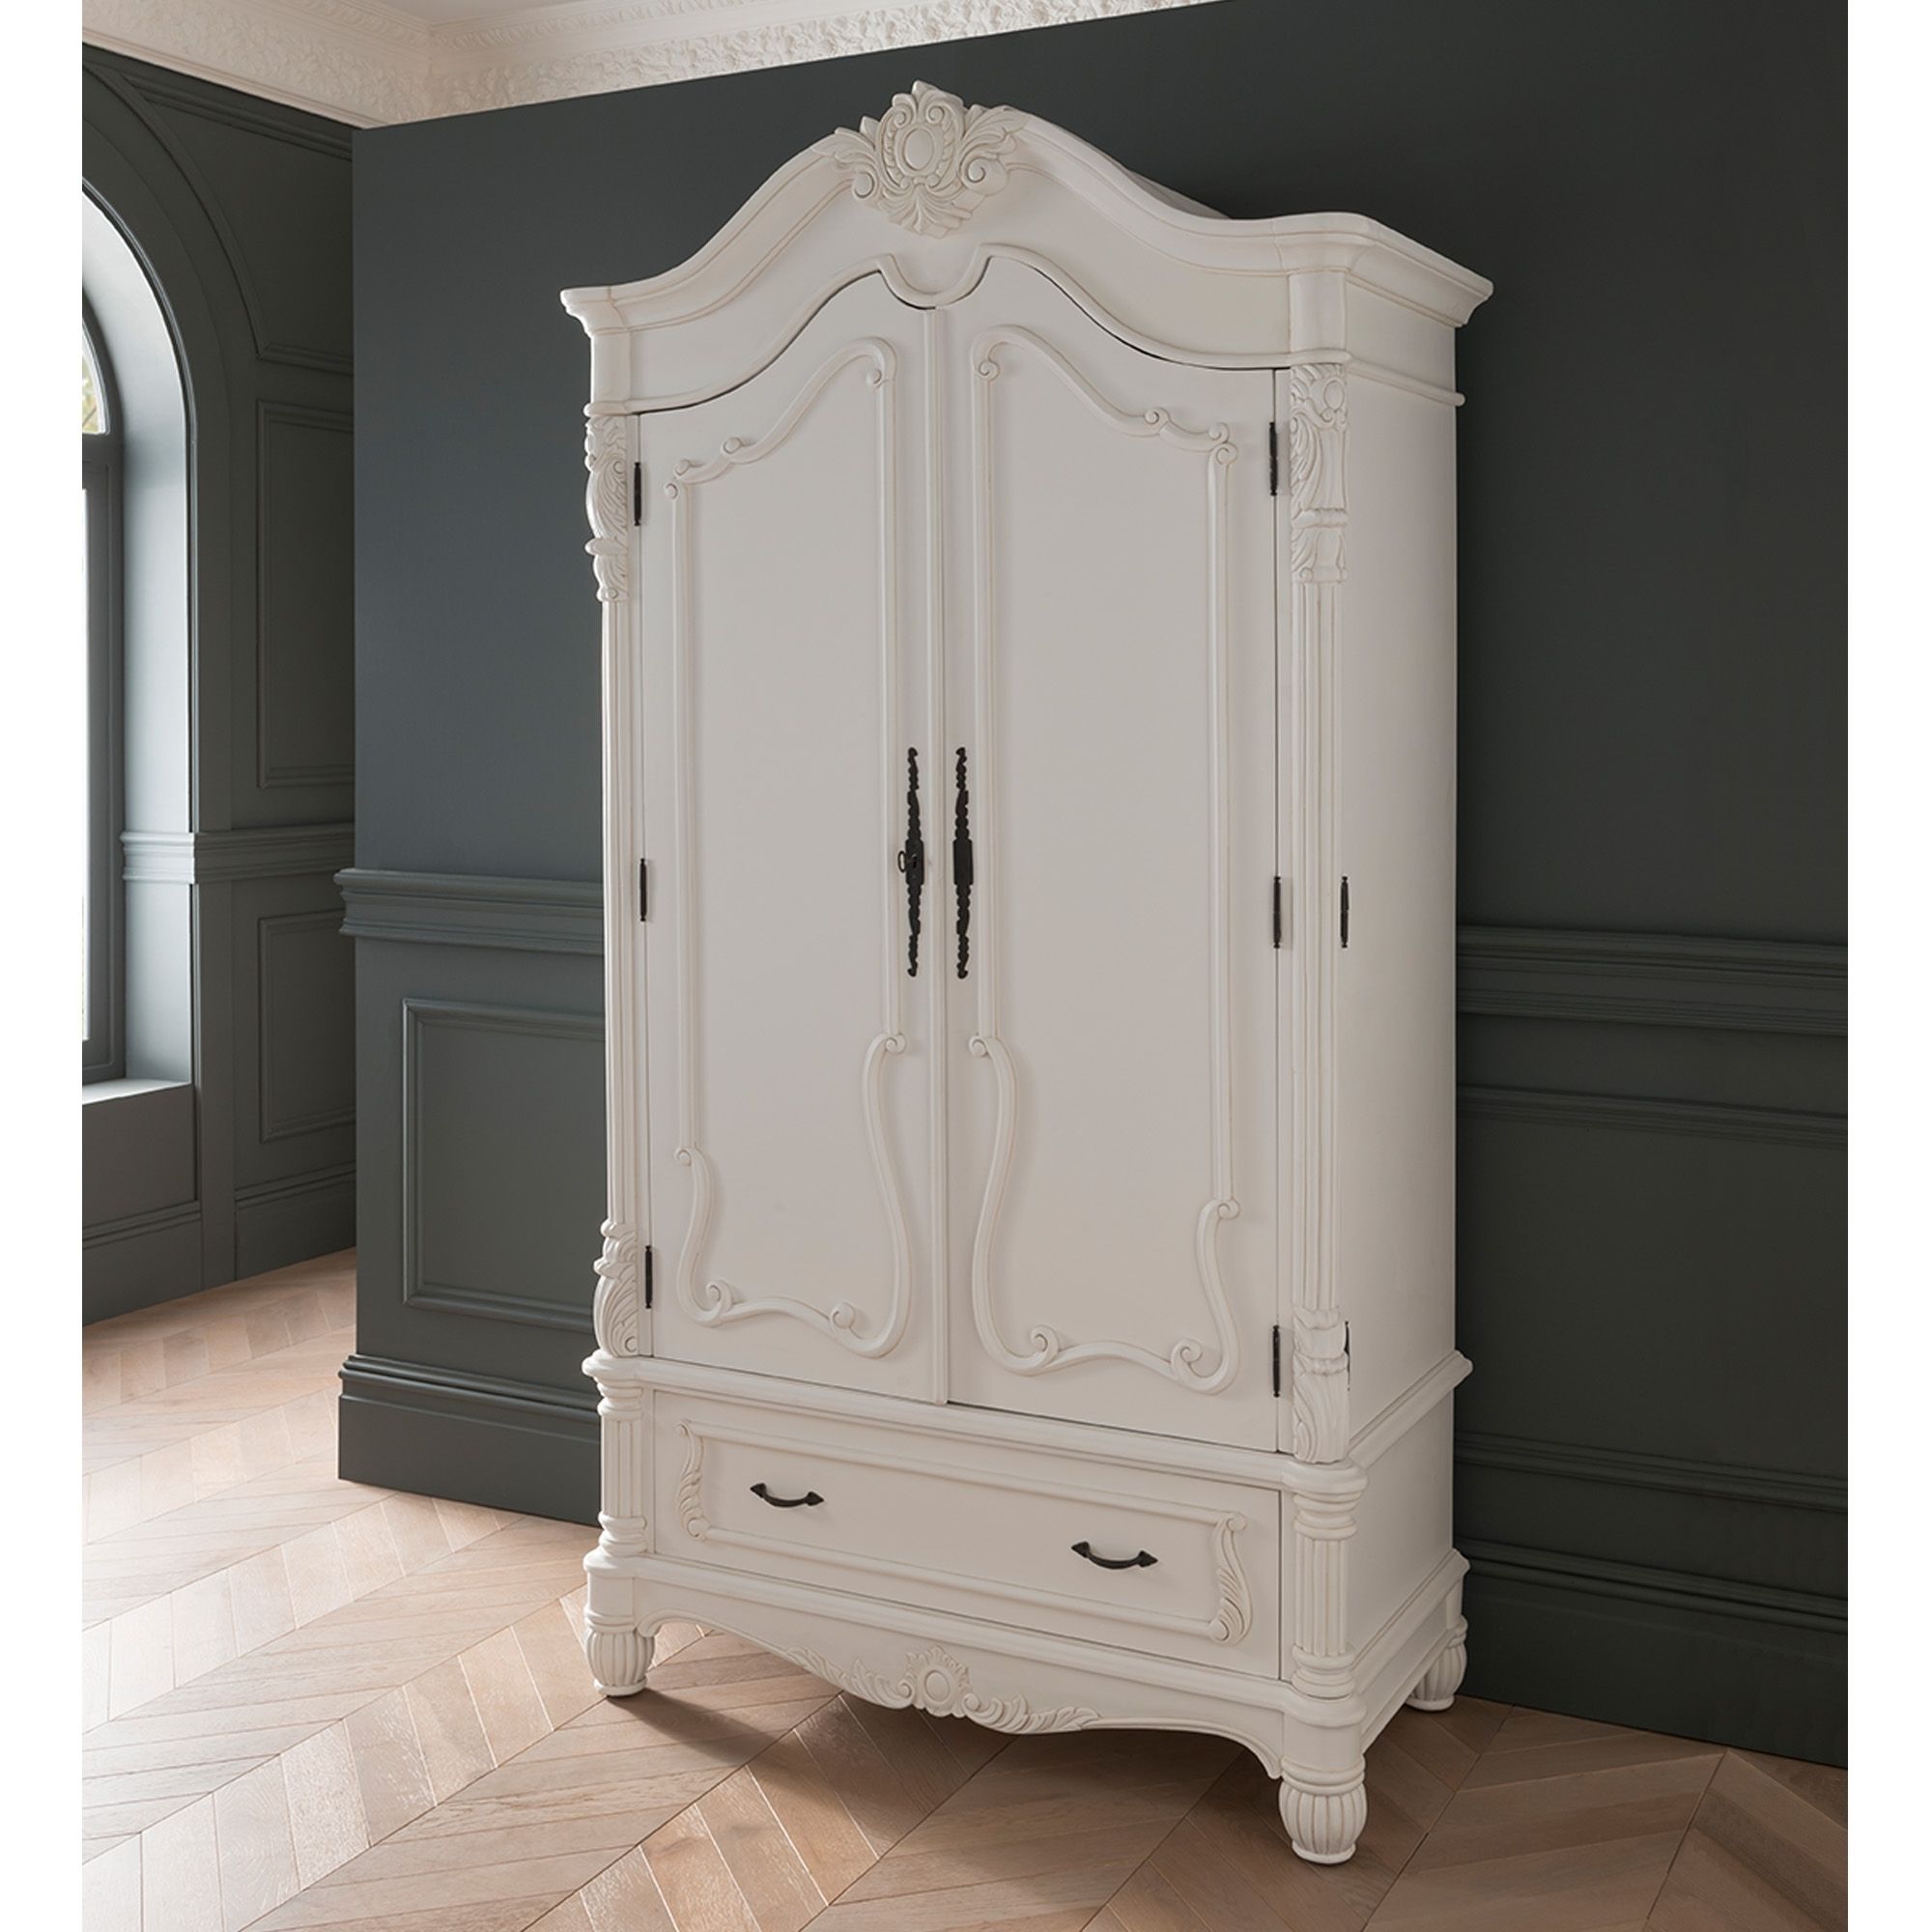 Antique French Style White Finished 1 Drawer Wardrobe | Homesdirect365 Pertaining To French Style Wardrobes (View 3 of 15)